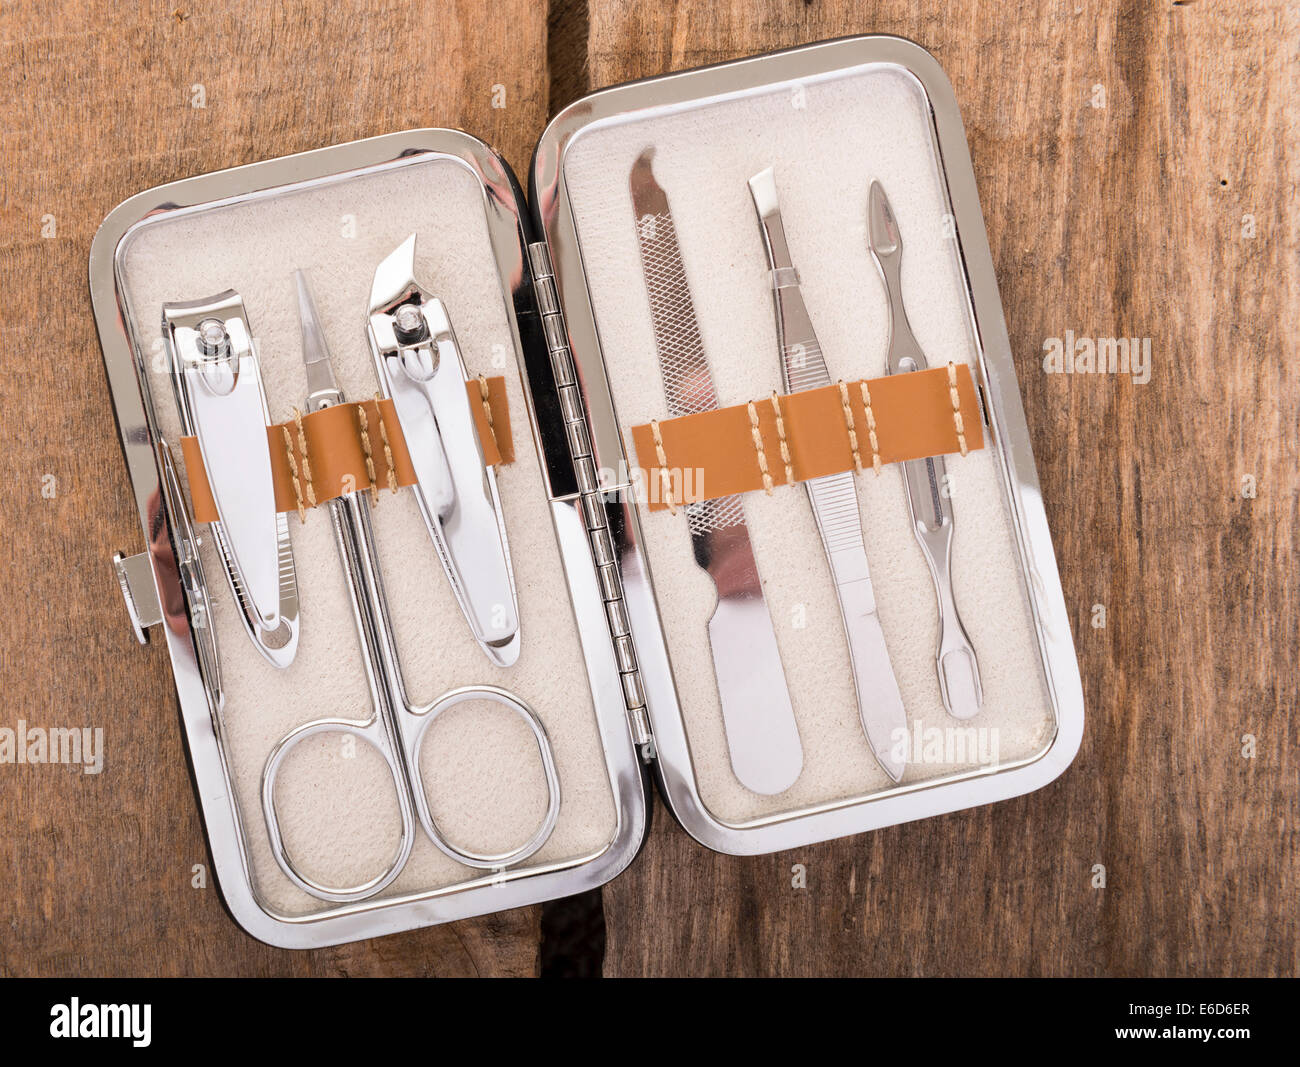 Classic metal kit of nail scissors and manicure tools on wooden background Stock Photo